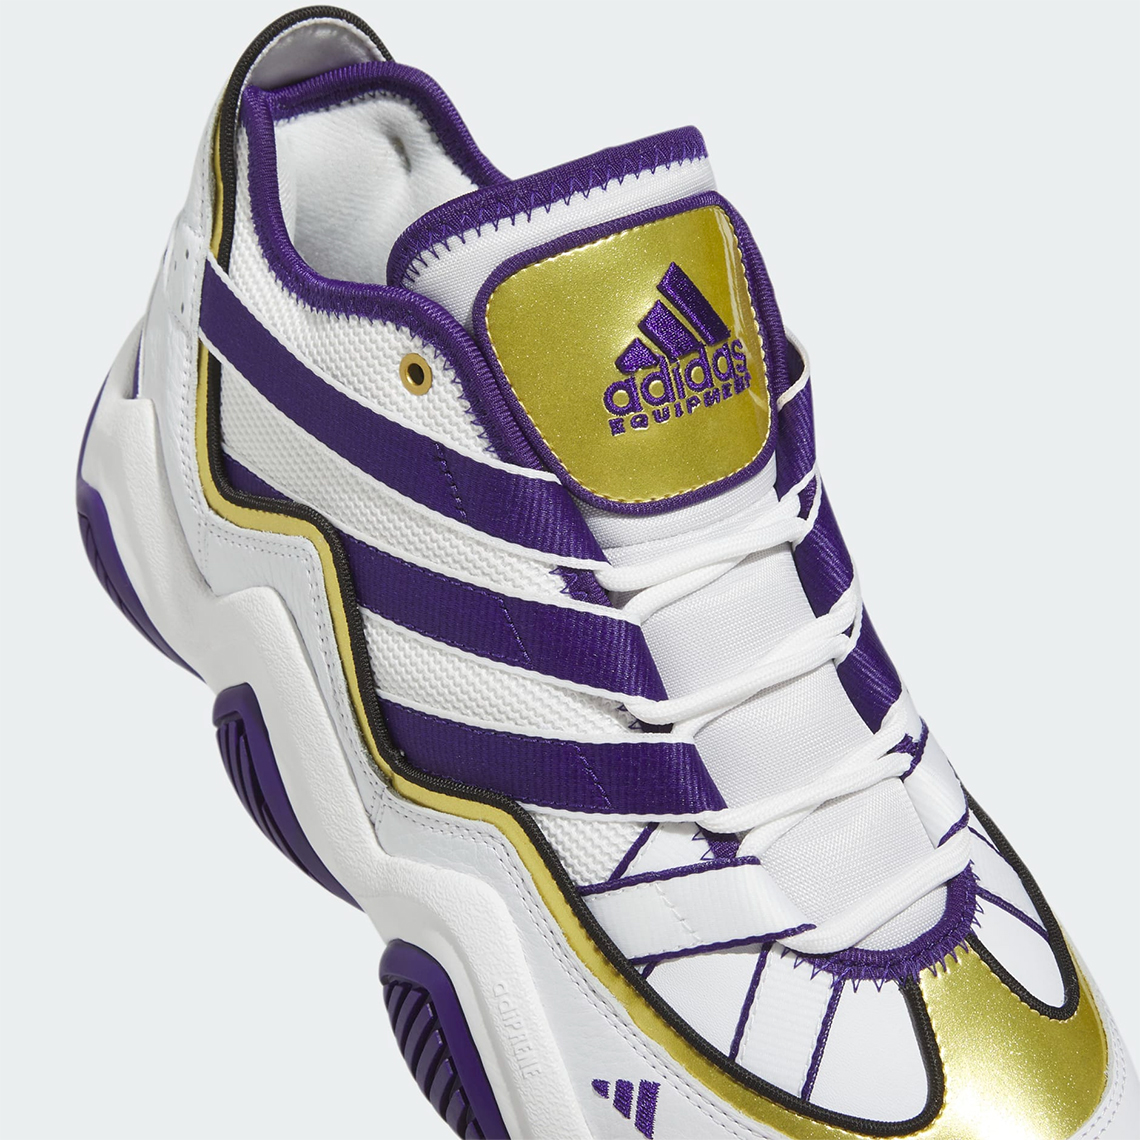 adidas schemes Top Ten 2010 Lakers Hq4624 4